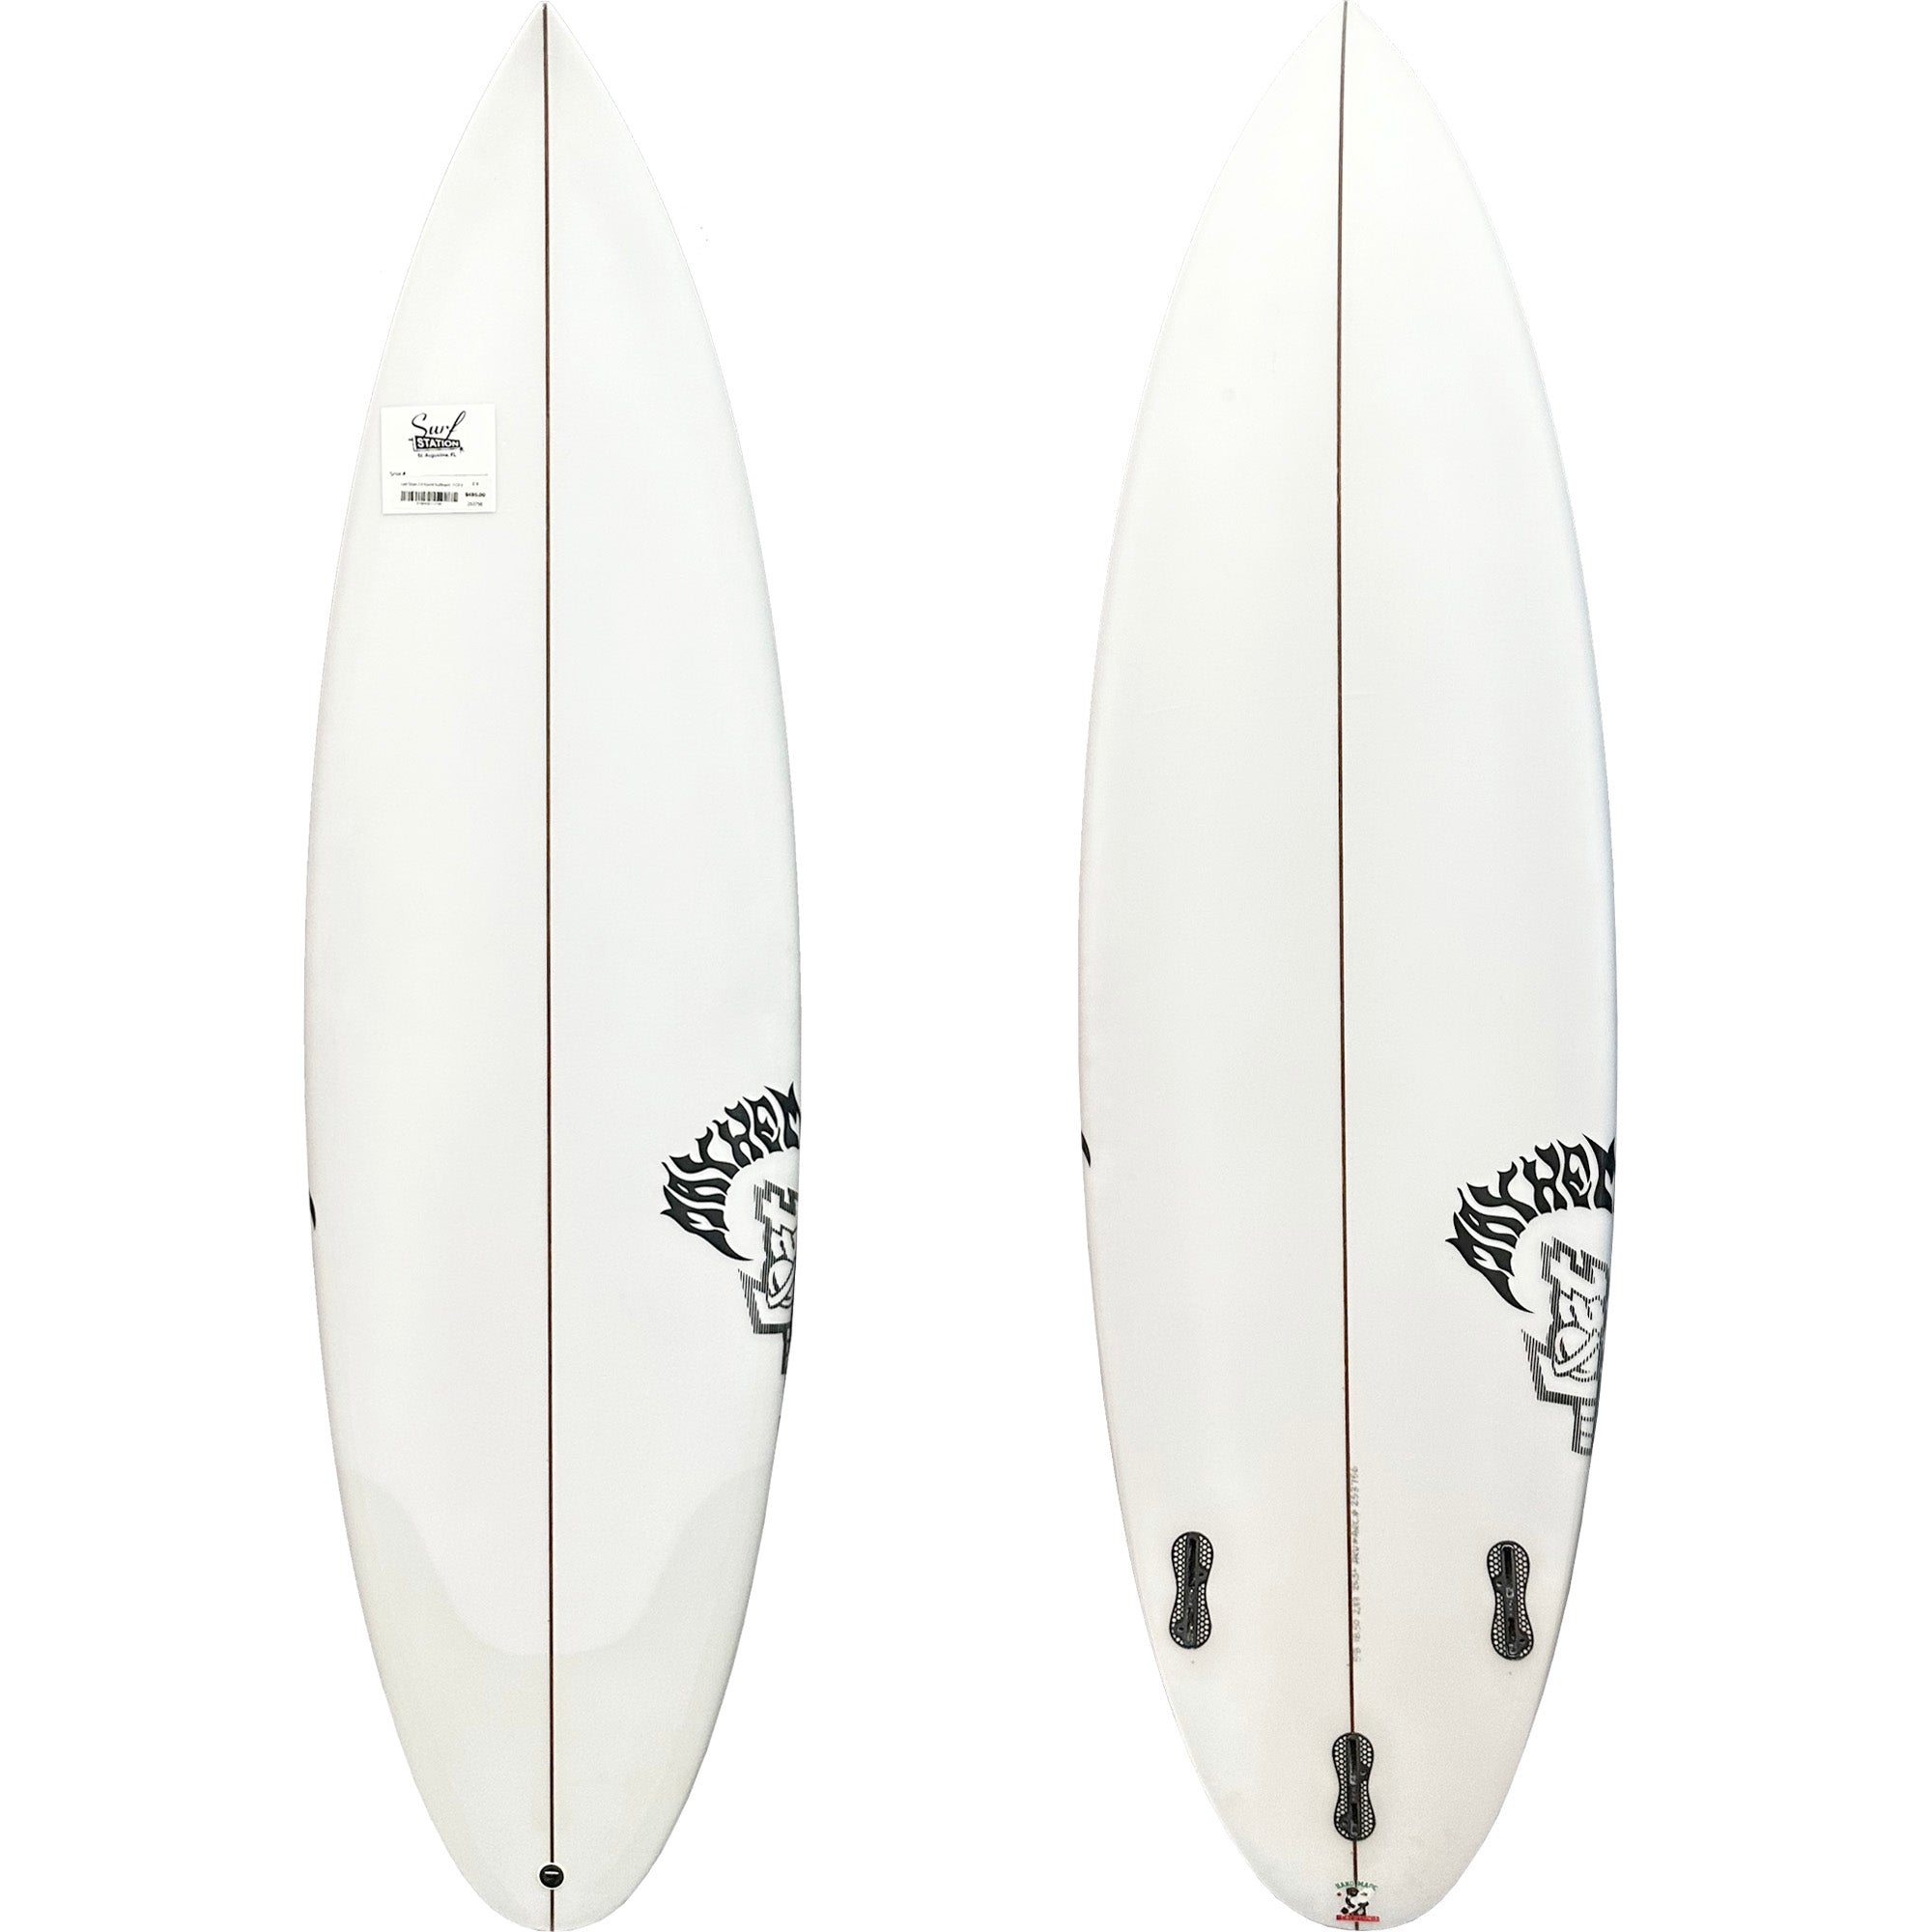 Lost Driver 3.0 Round Surfboard - FCS II